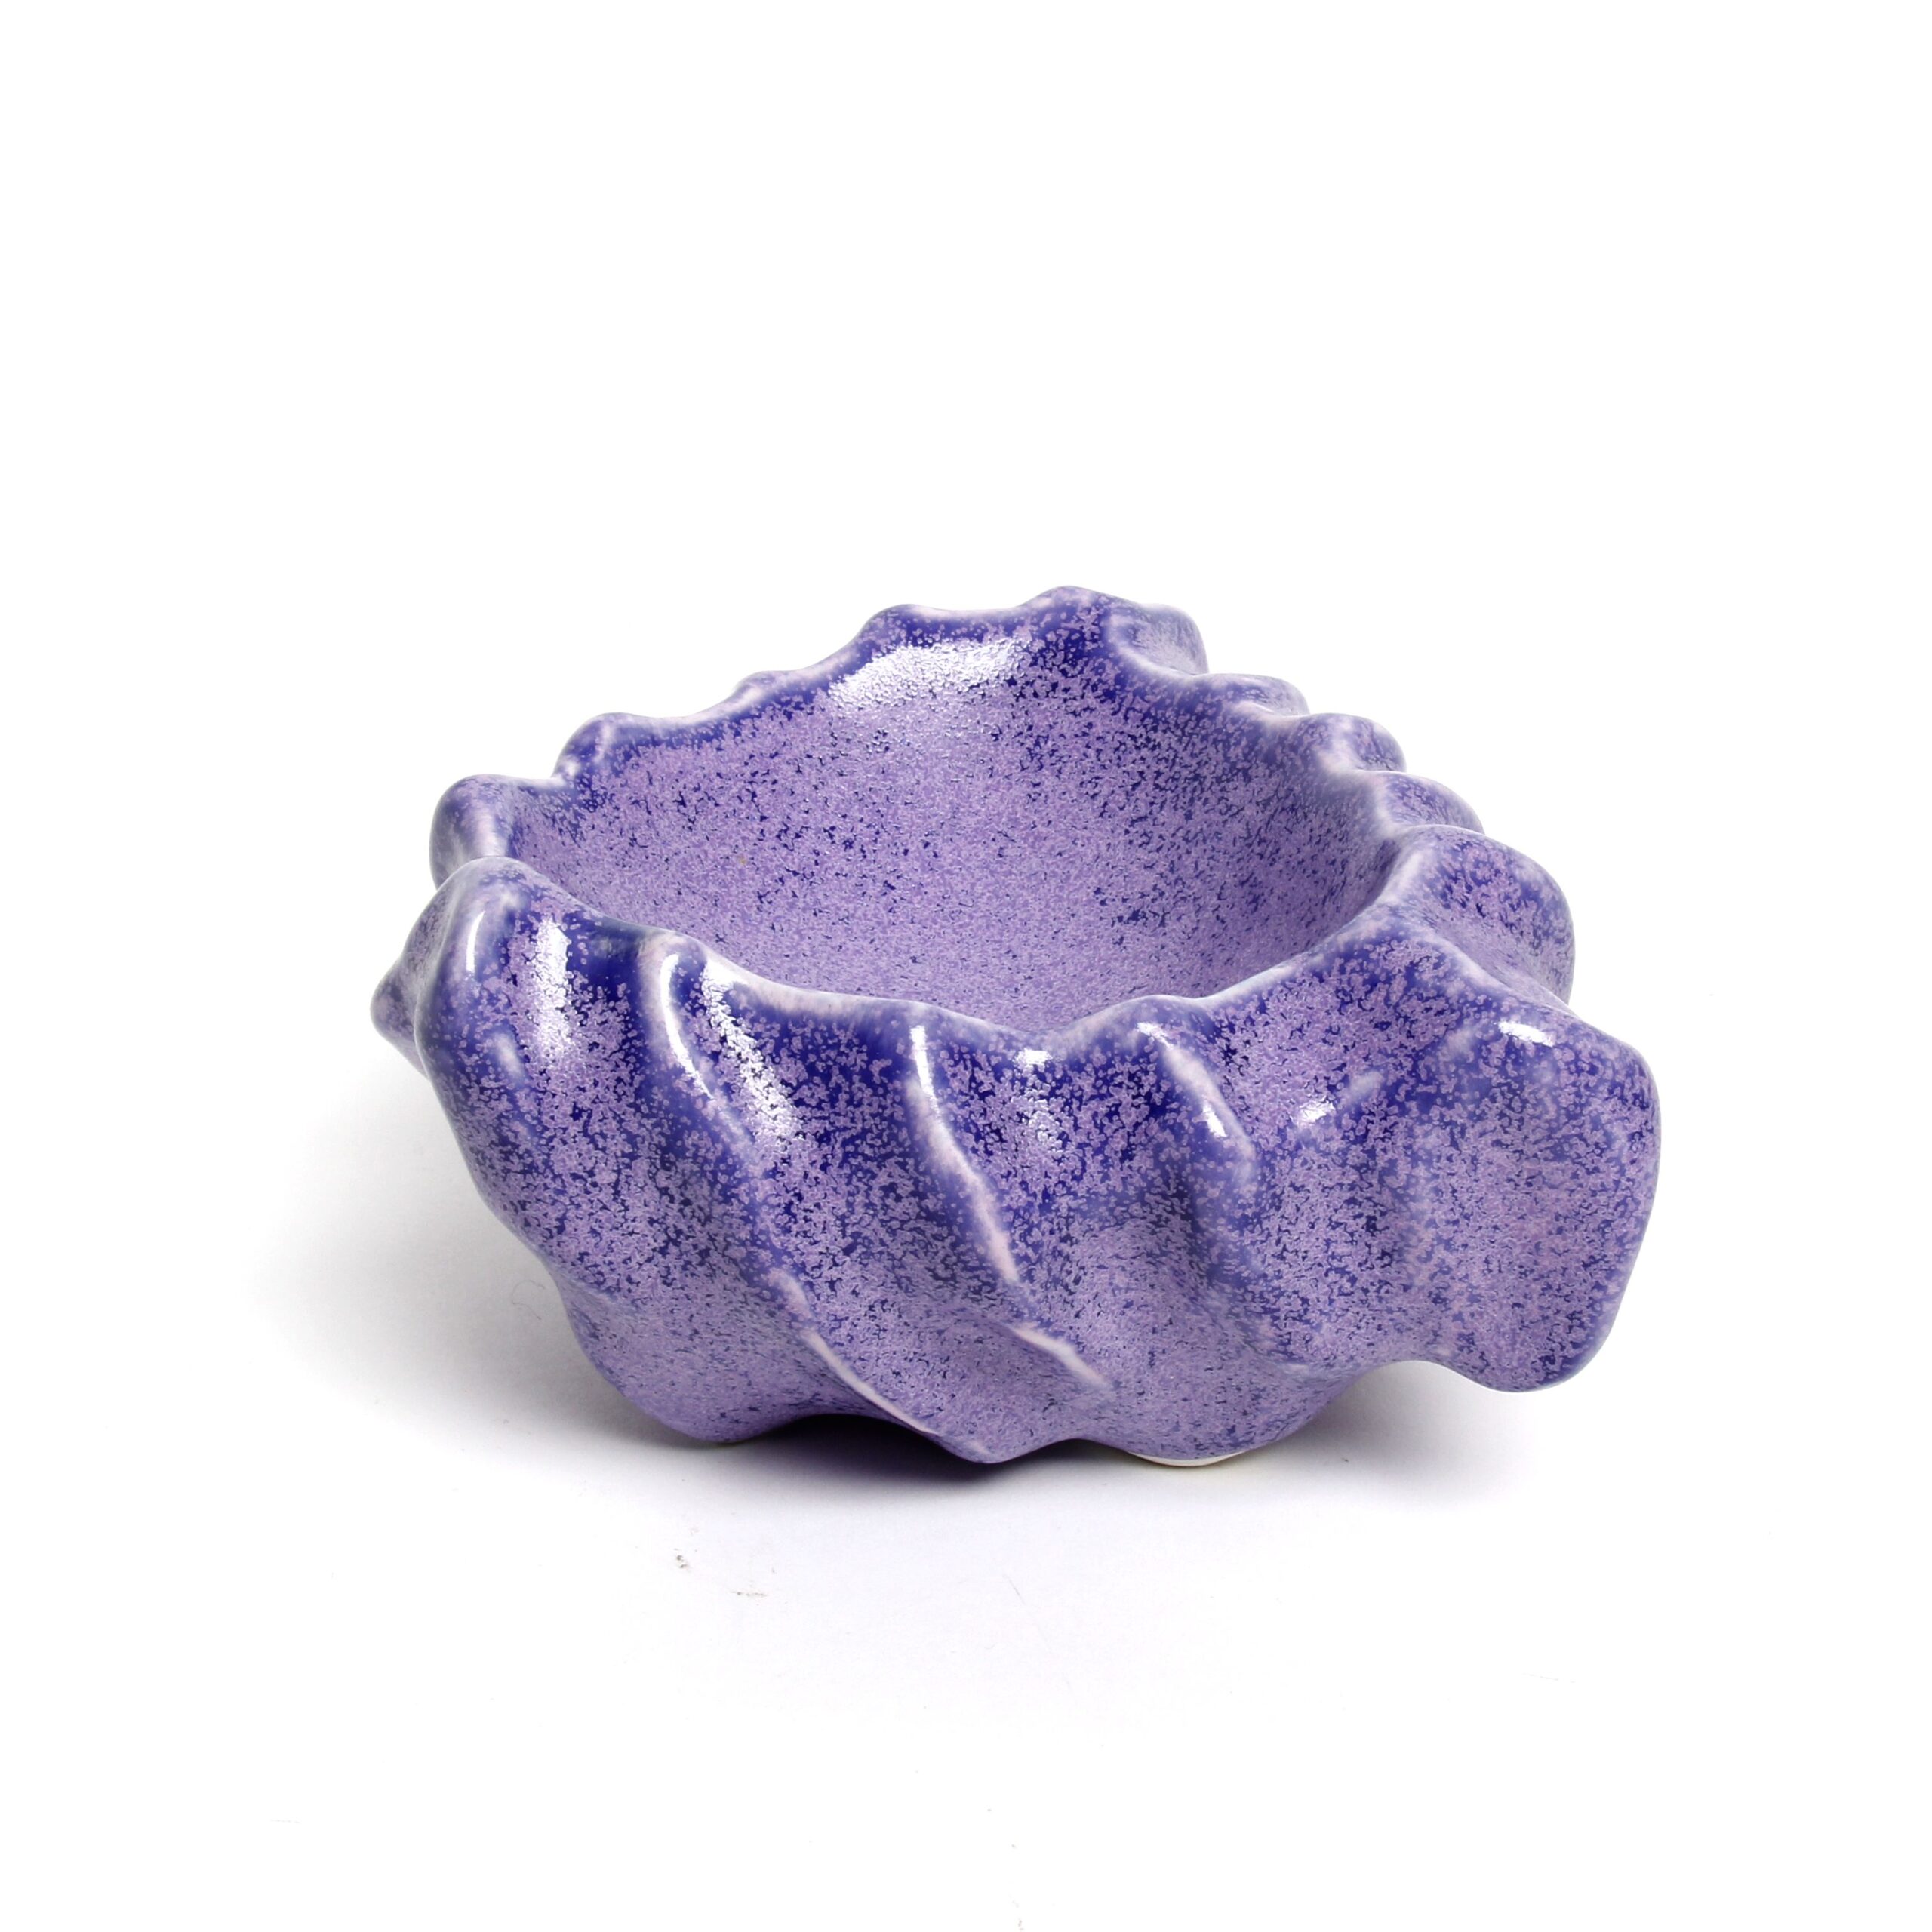 William Lee: Triangle Bowl in Purple Product Image 2 of 3